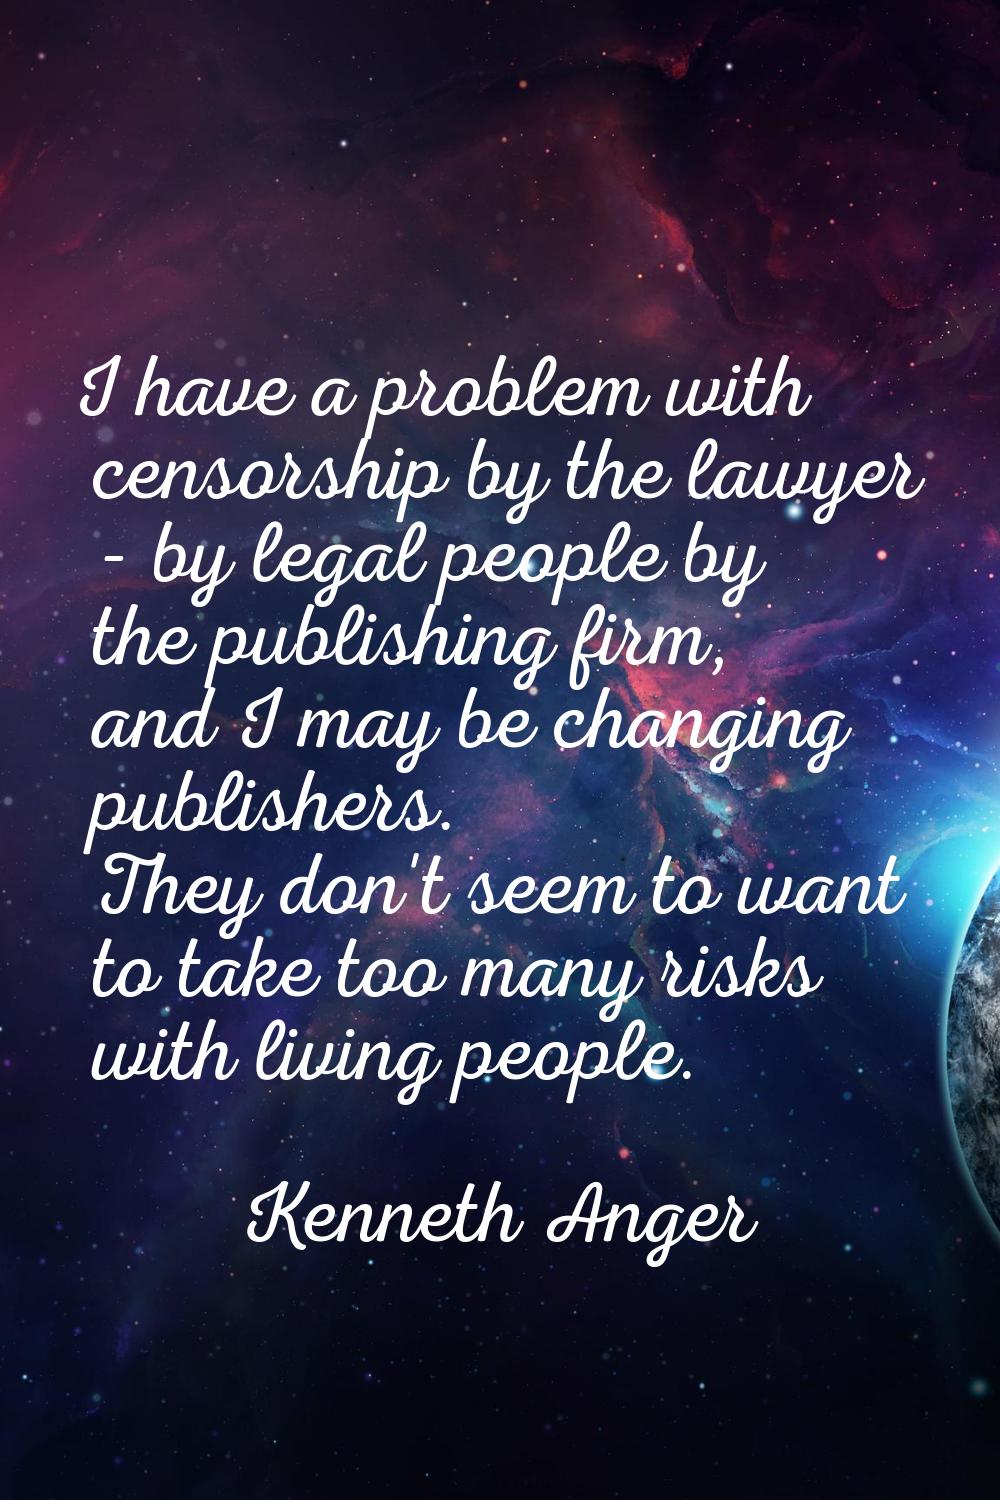 I have a problem with censorship by the lawyer - by legal people by the publishing firm, and I may 